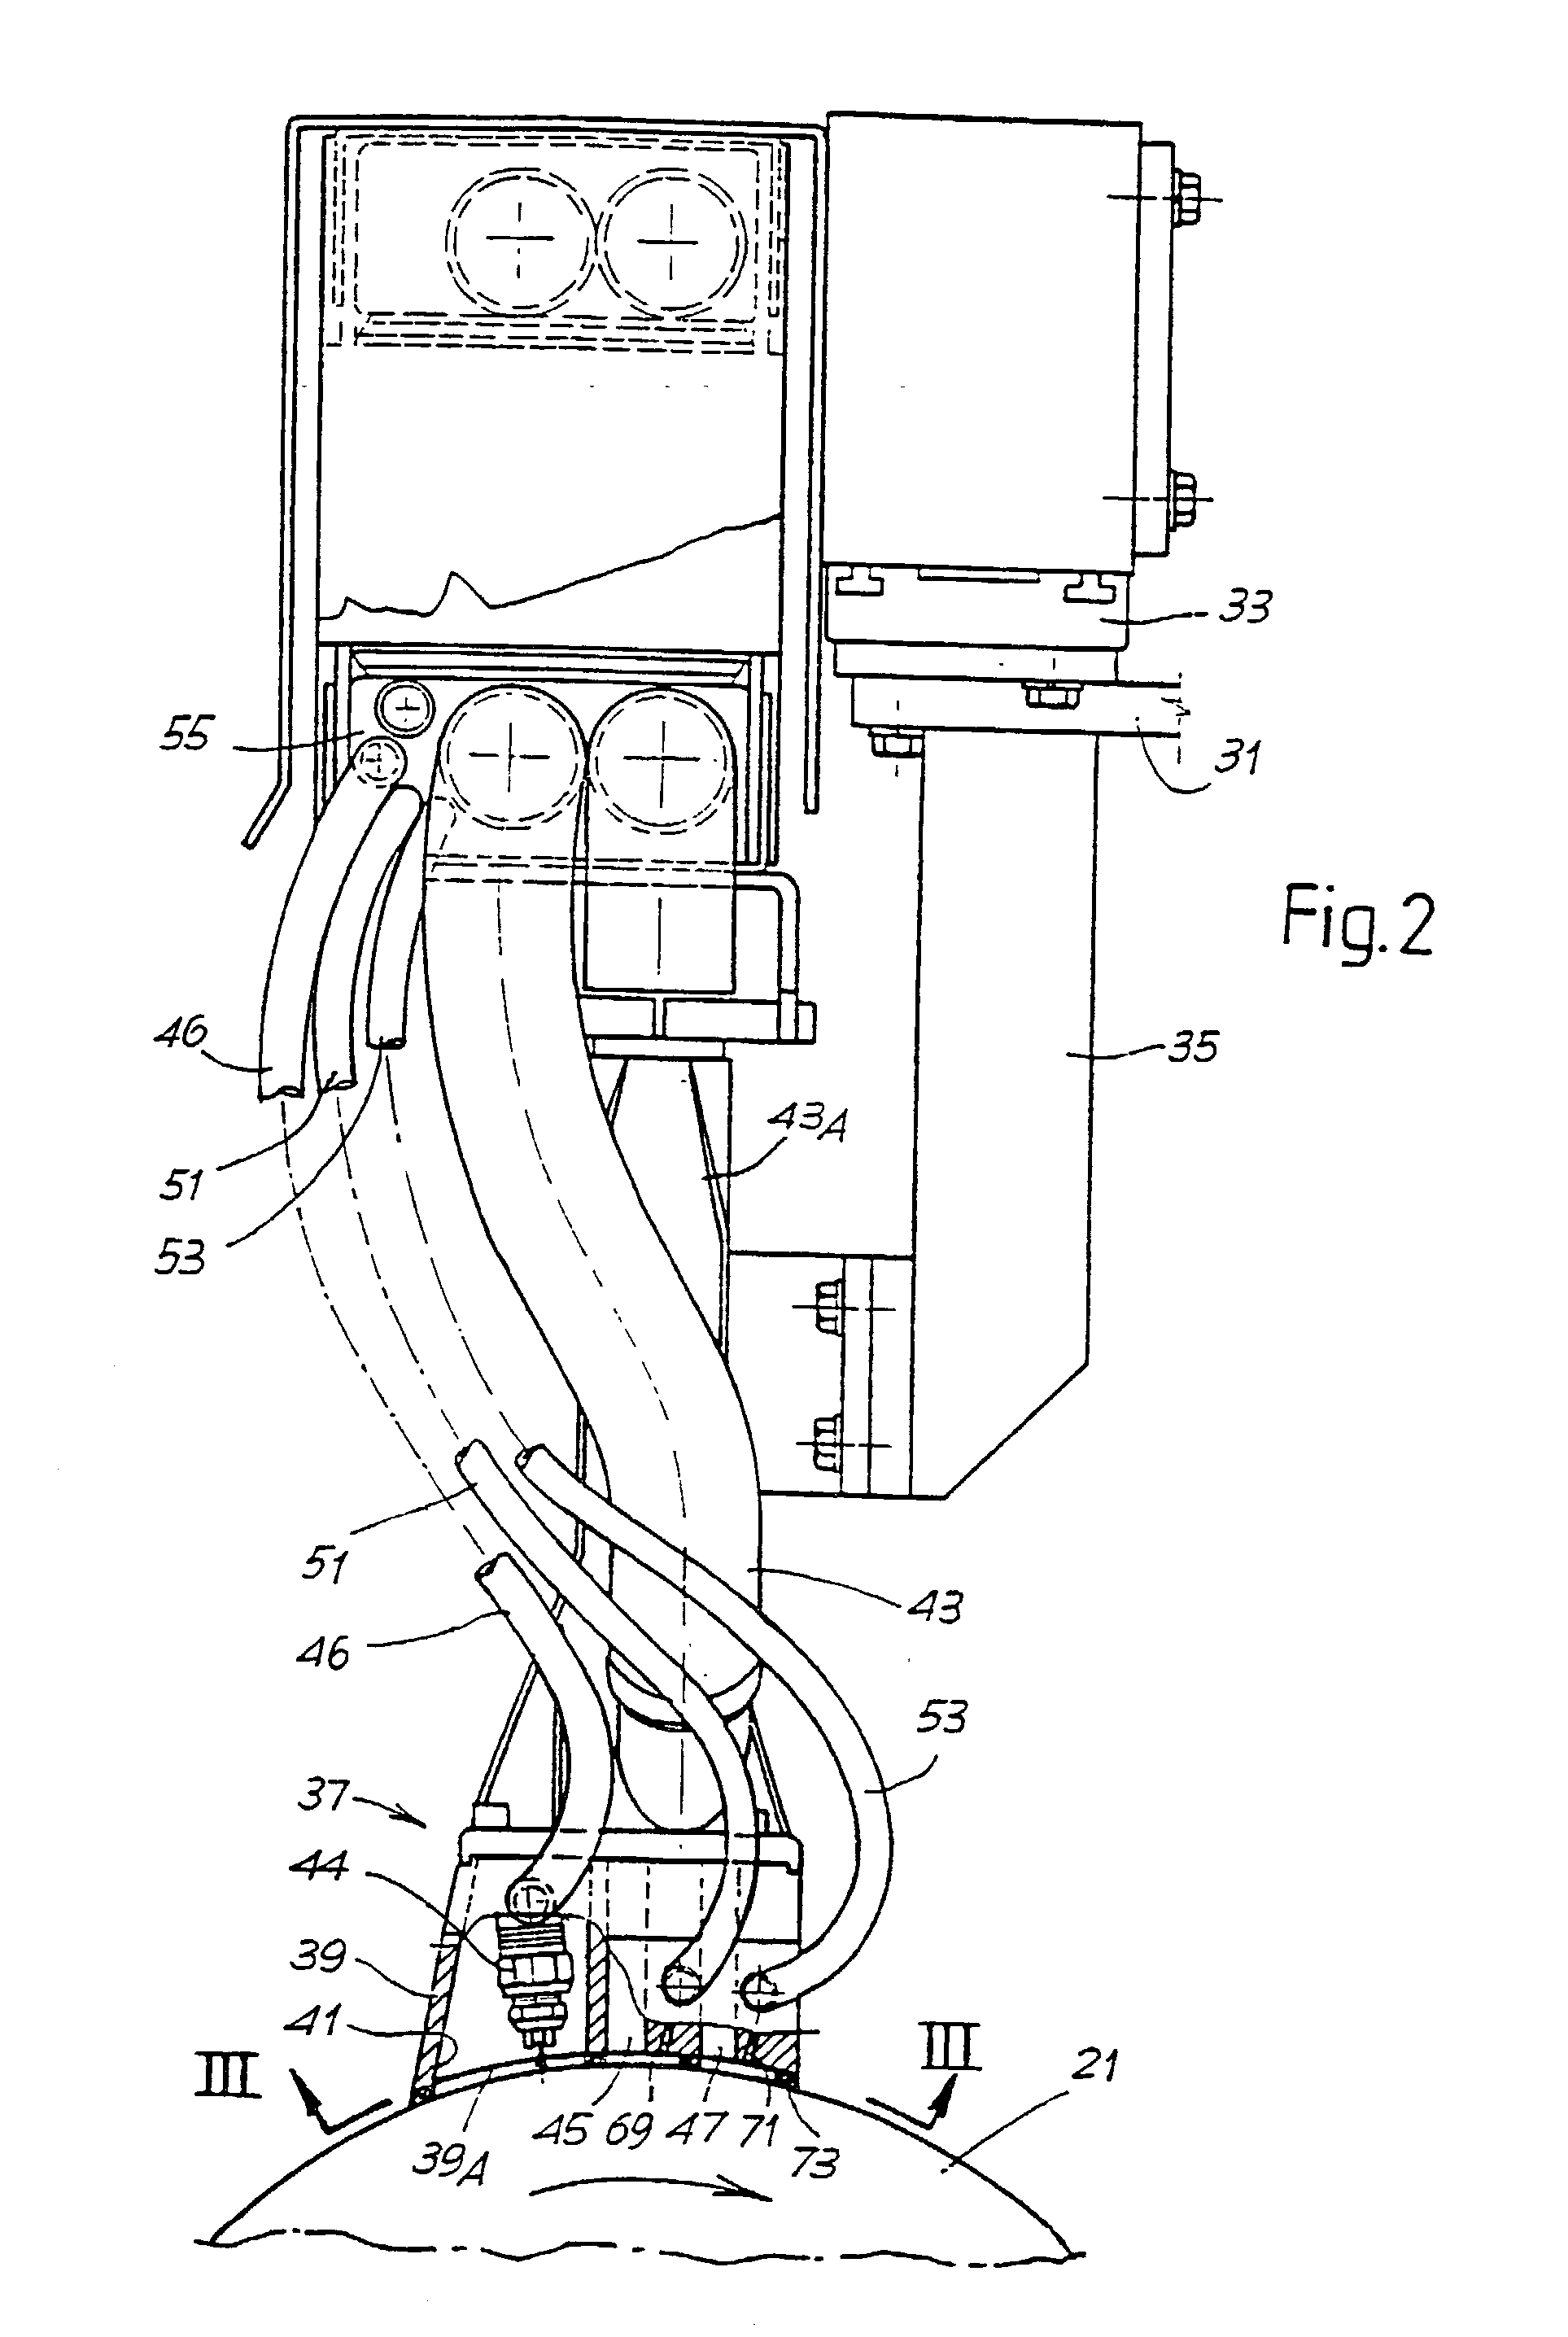 Device and method for cleaning a surface of a rotating cylinder, such as a plate cylinder of a printing press or other